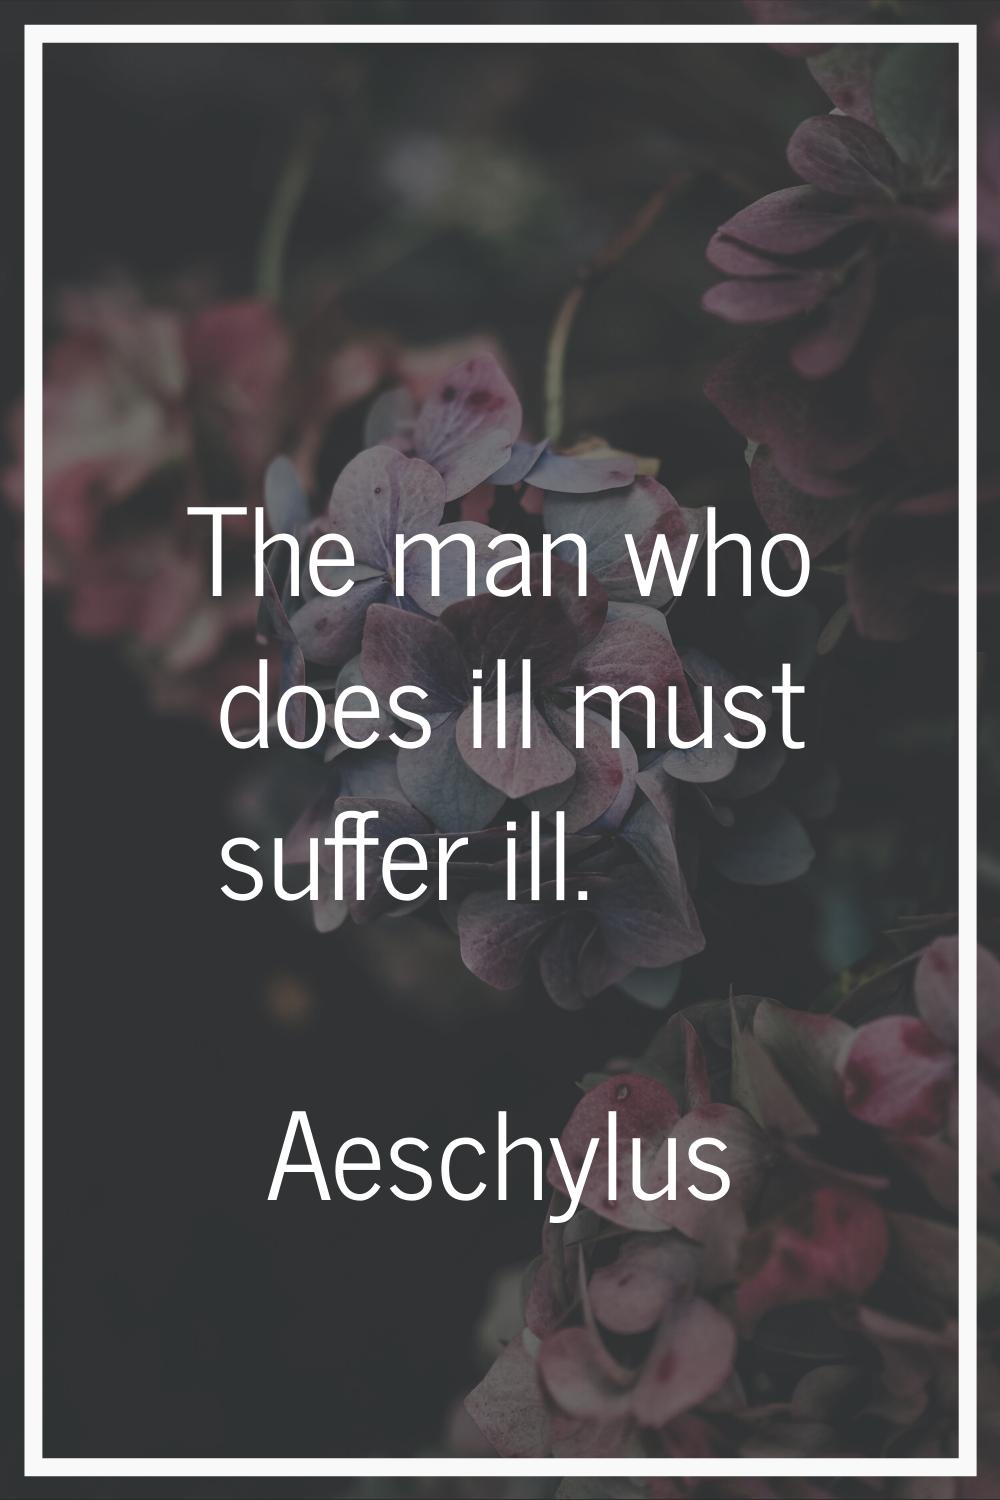 The man who does ill must suffer ill.